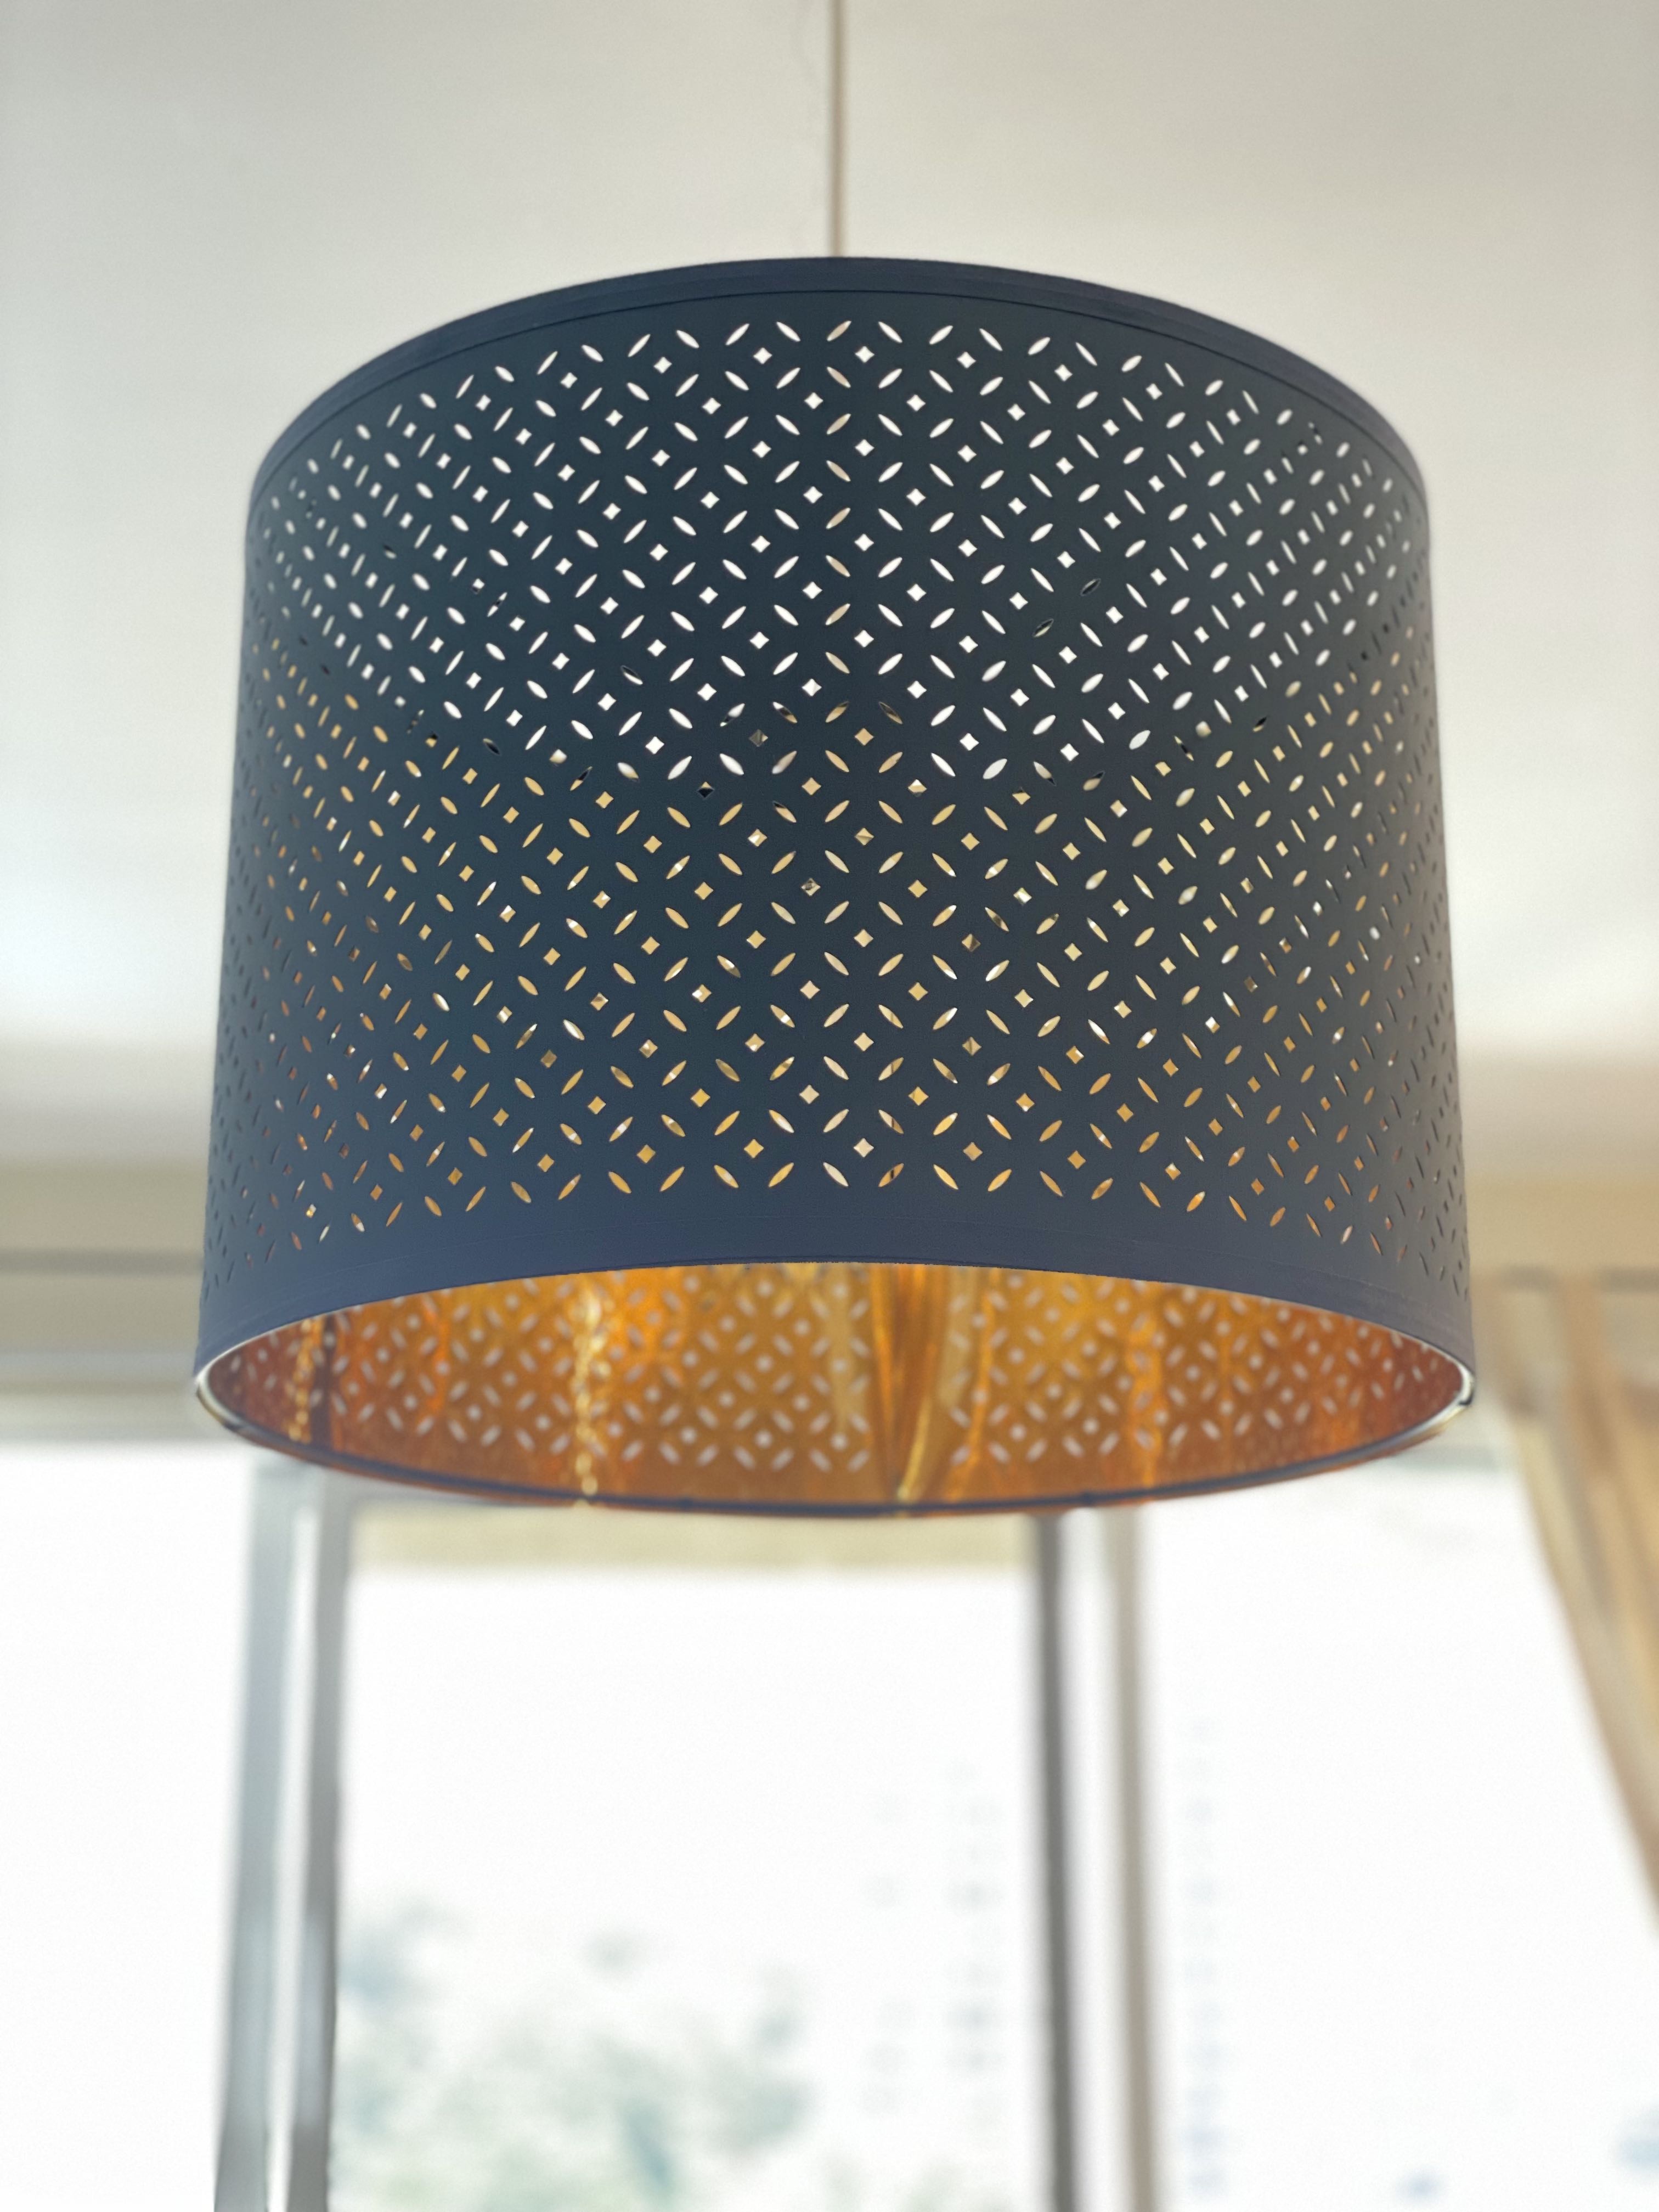 Ikea NYMO Perforated Large 23 Black&Brass Lamp Shade new-open box  (603.772.07) 